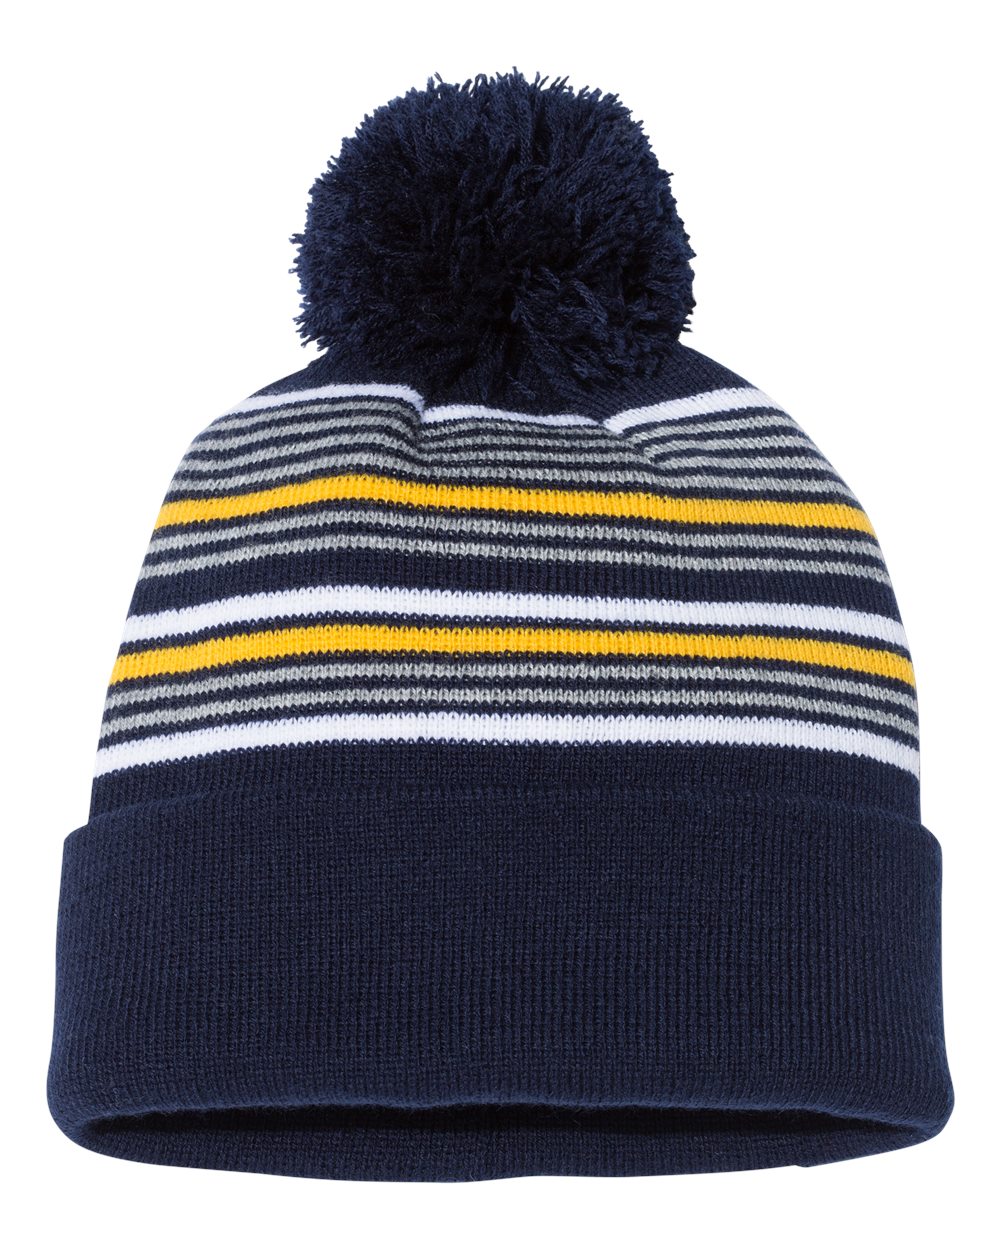 click to view Navy/ White/ Grey/ Gold